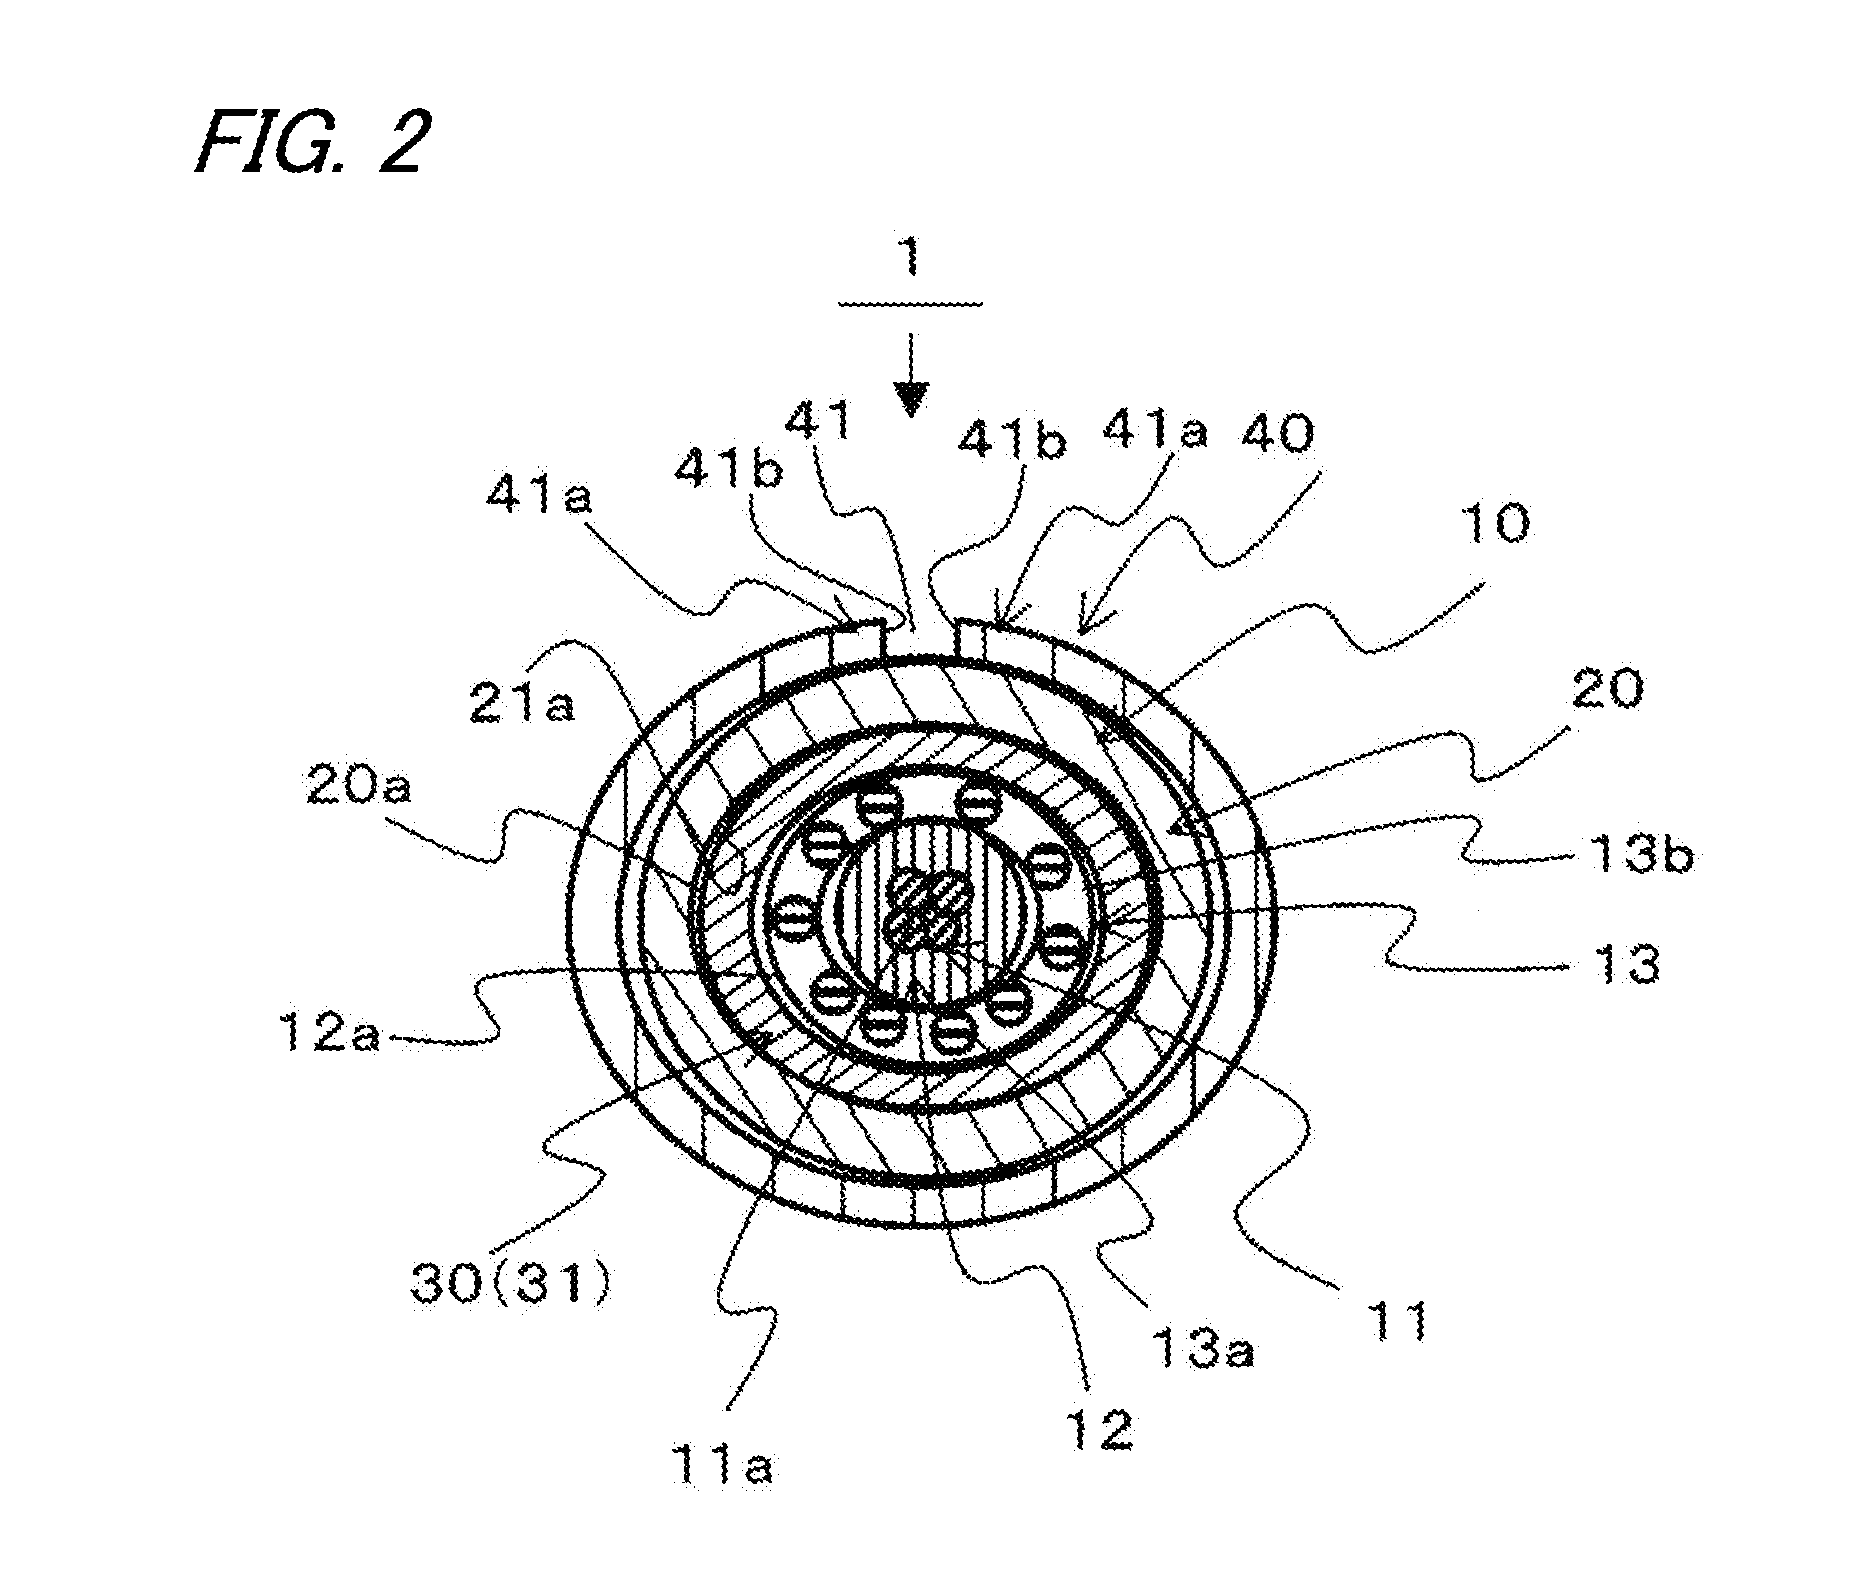 Structure of connection between coaxial cable and shield terminal, and method of connection therebetween